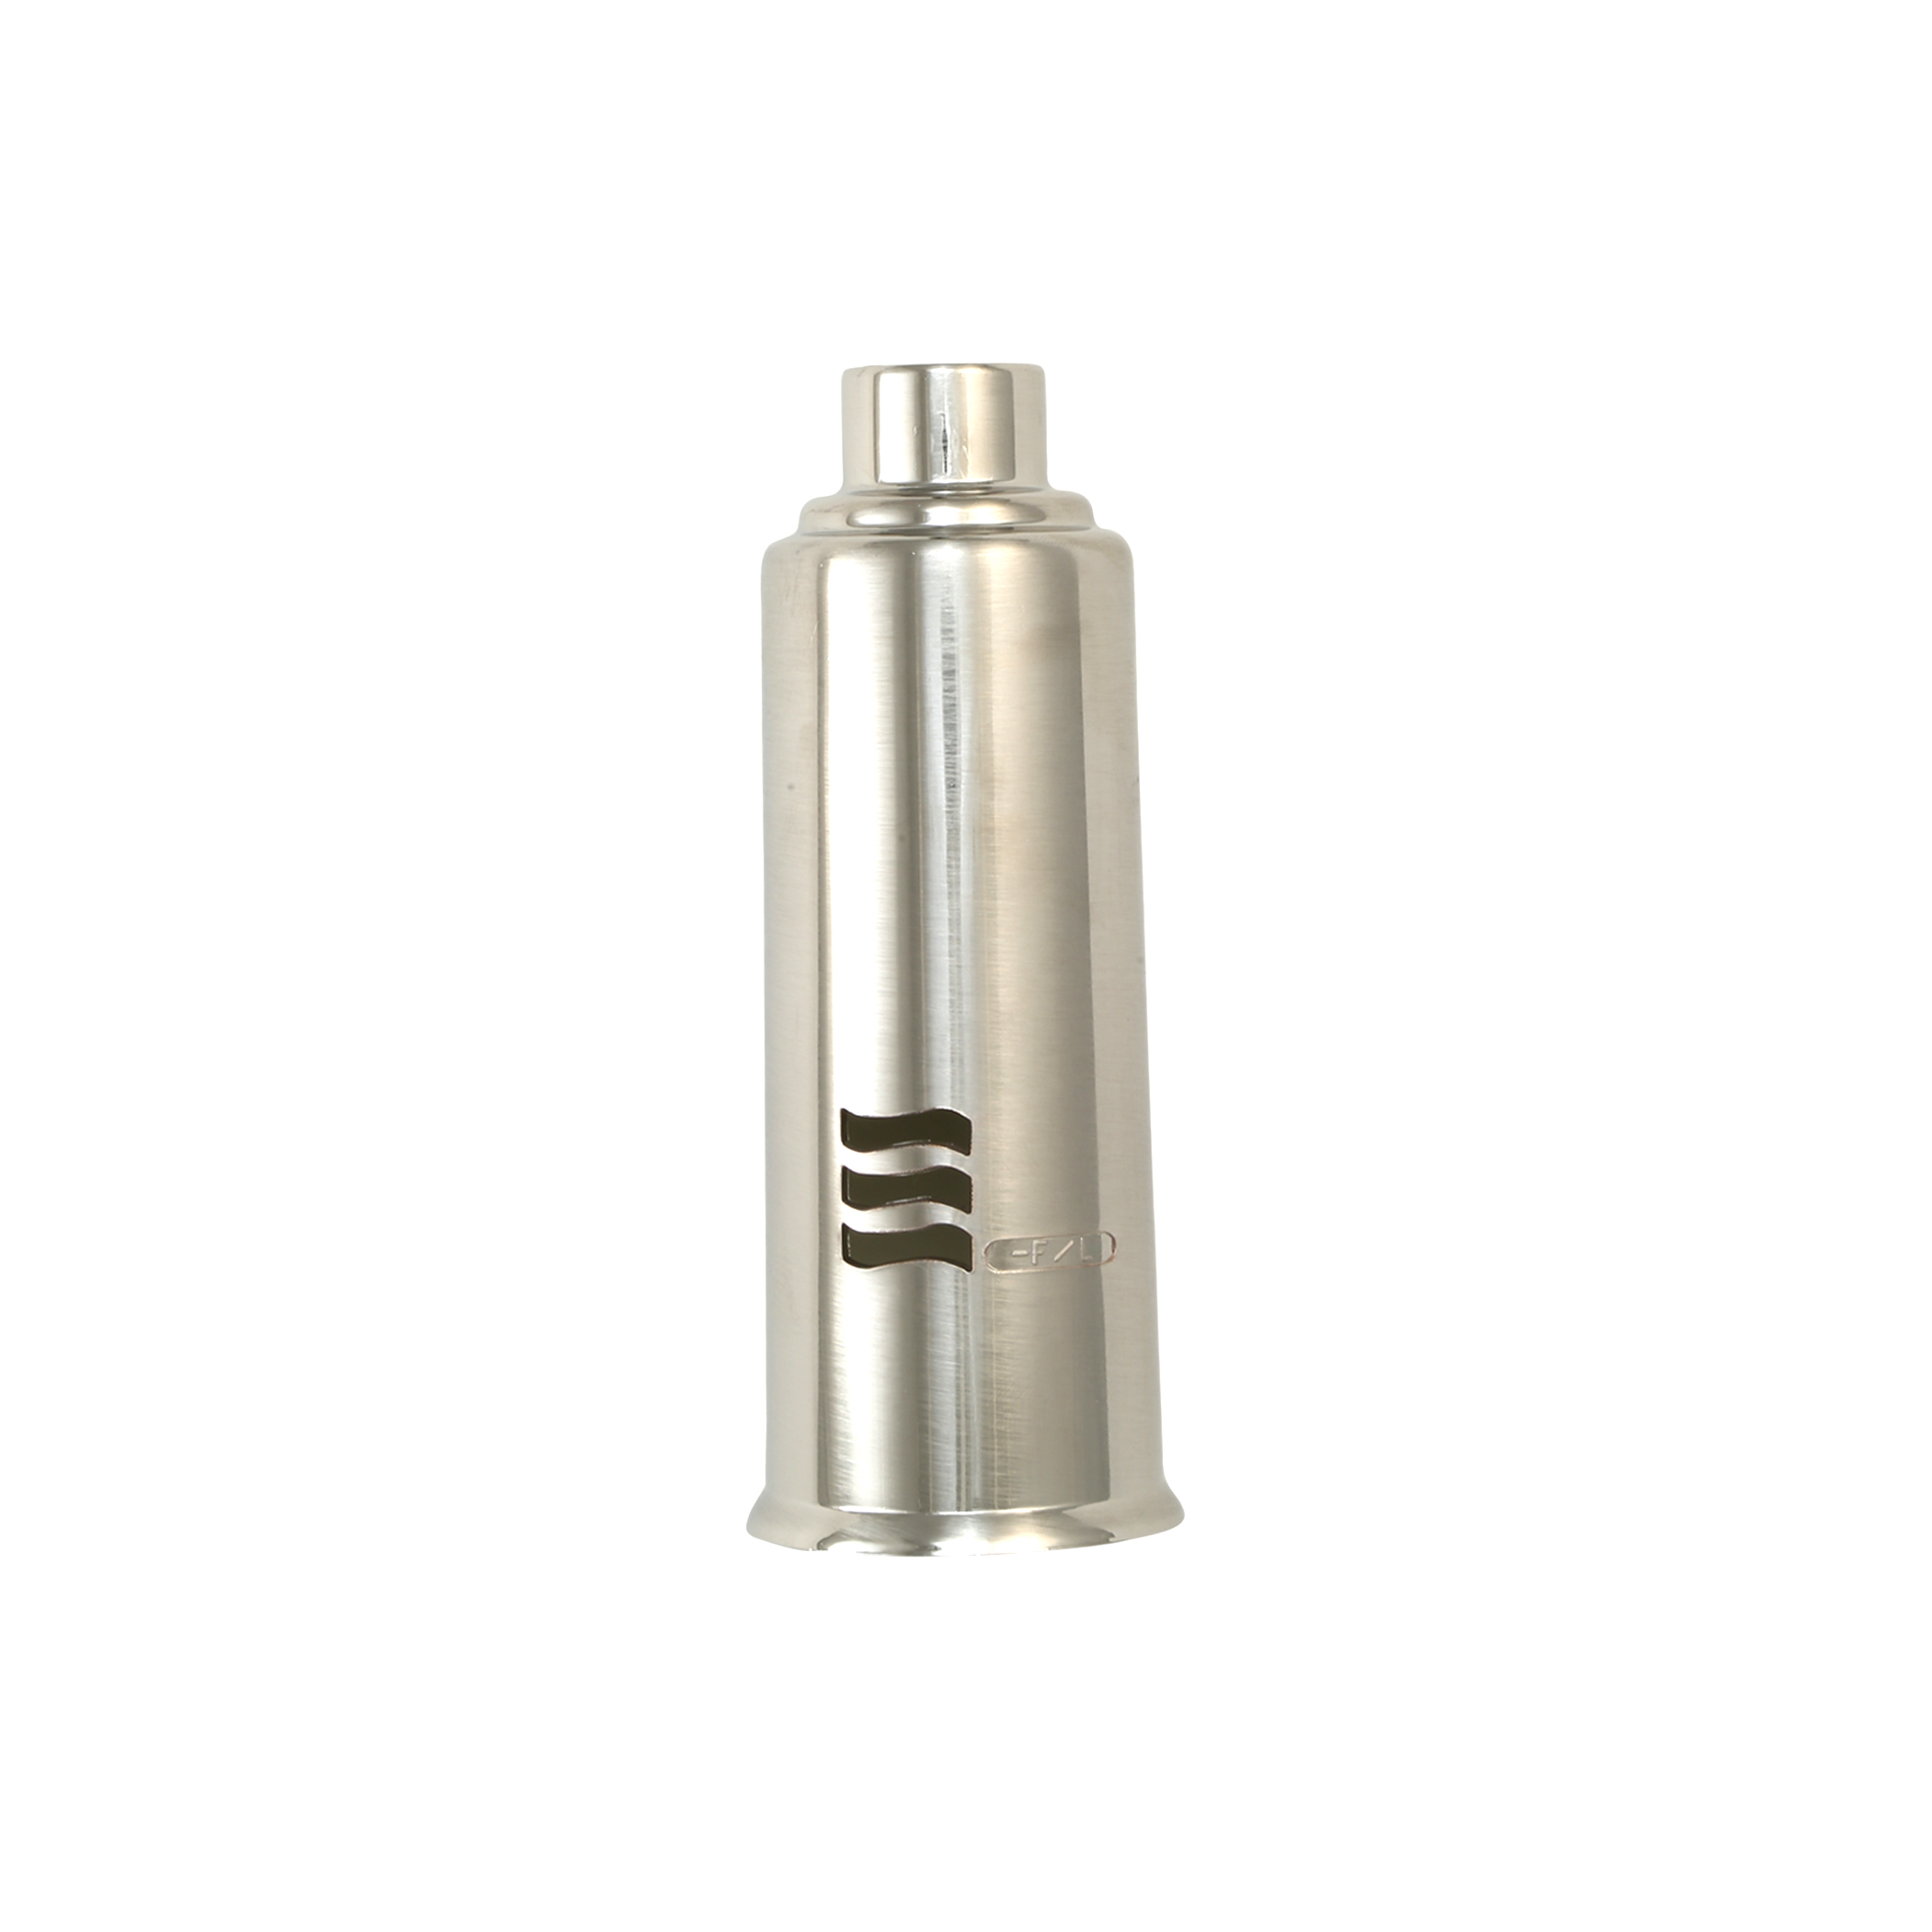 Danco 89503 Air Gap Cap Soap Dispenser with Straight Nozzle In Brushed Nickel E1 